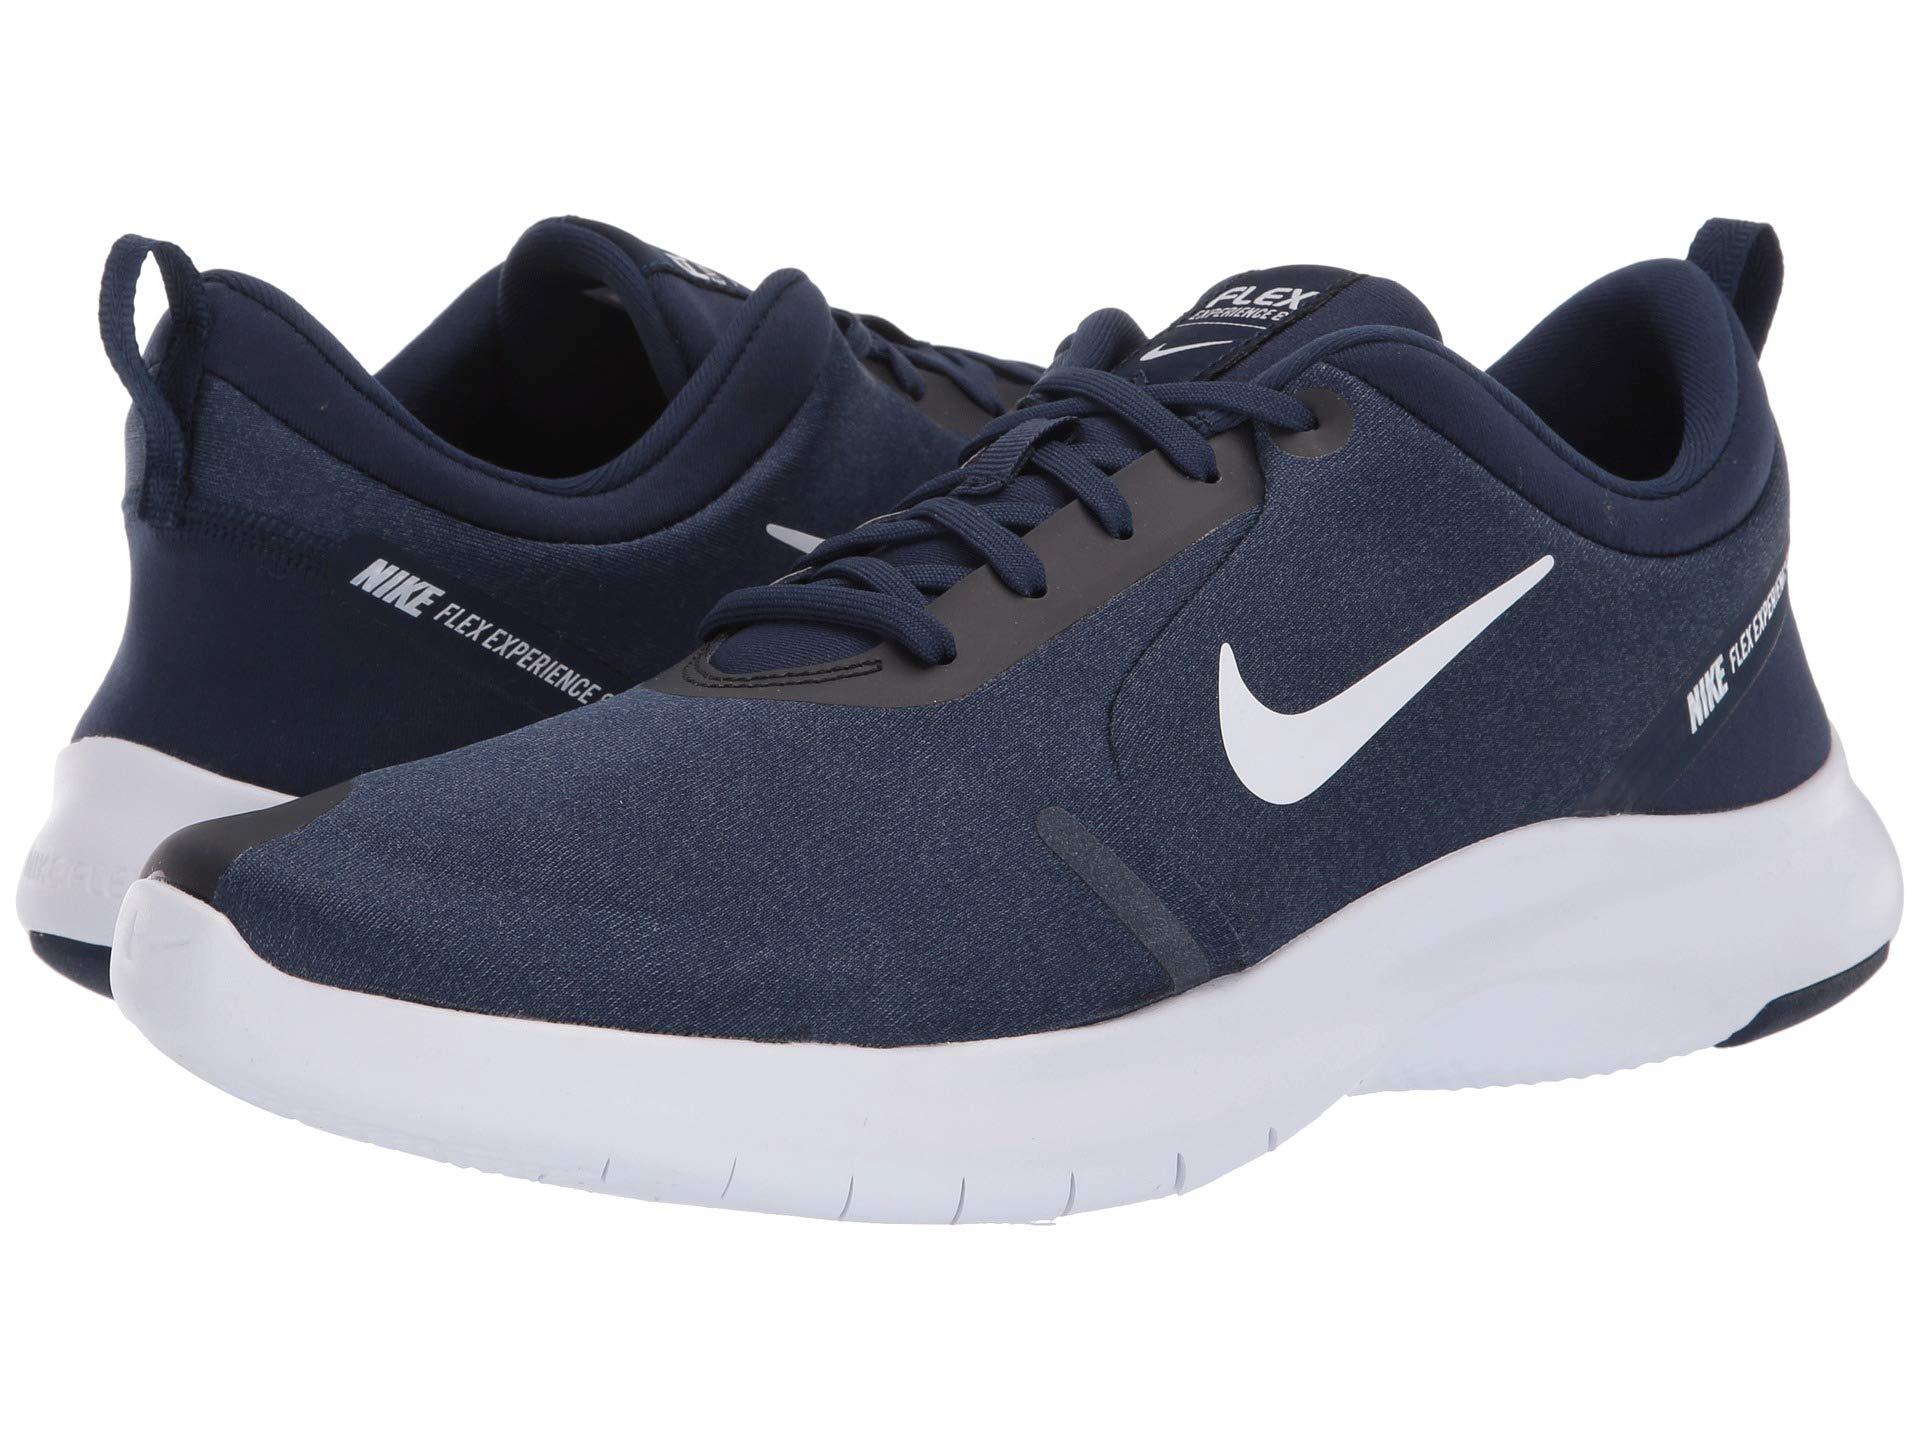 Nike Synthetic Flex Experience Rn 8 Running Shoes in Navy/White ... محل سيجار